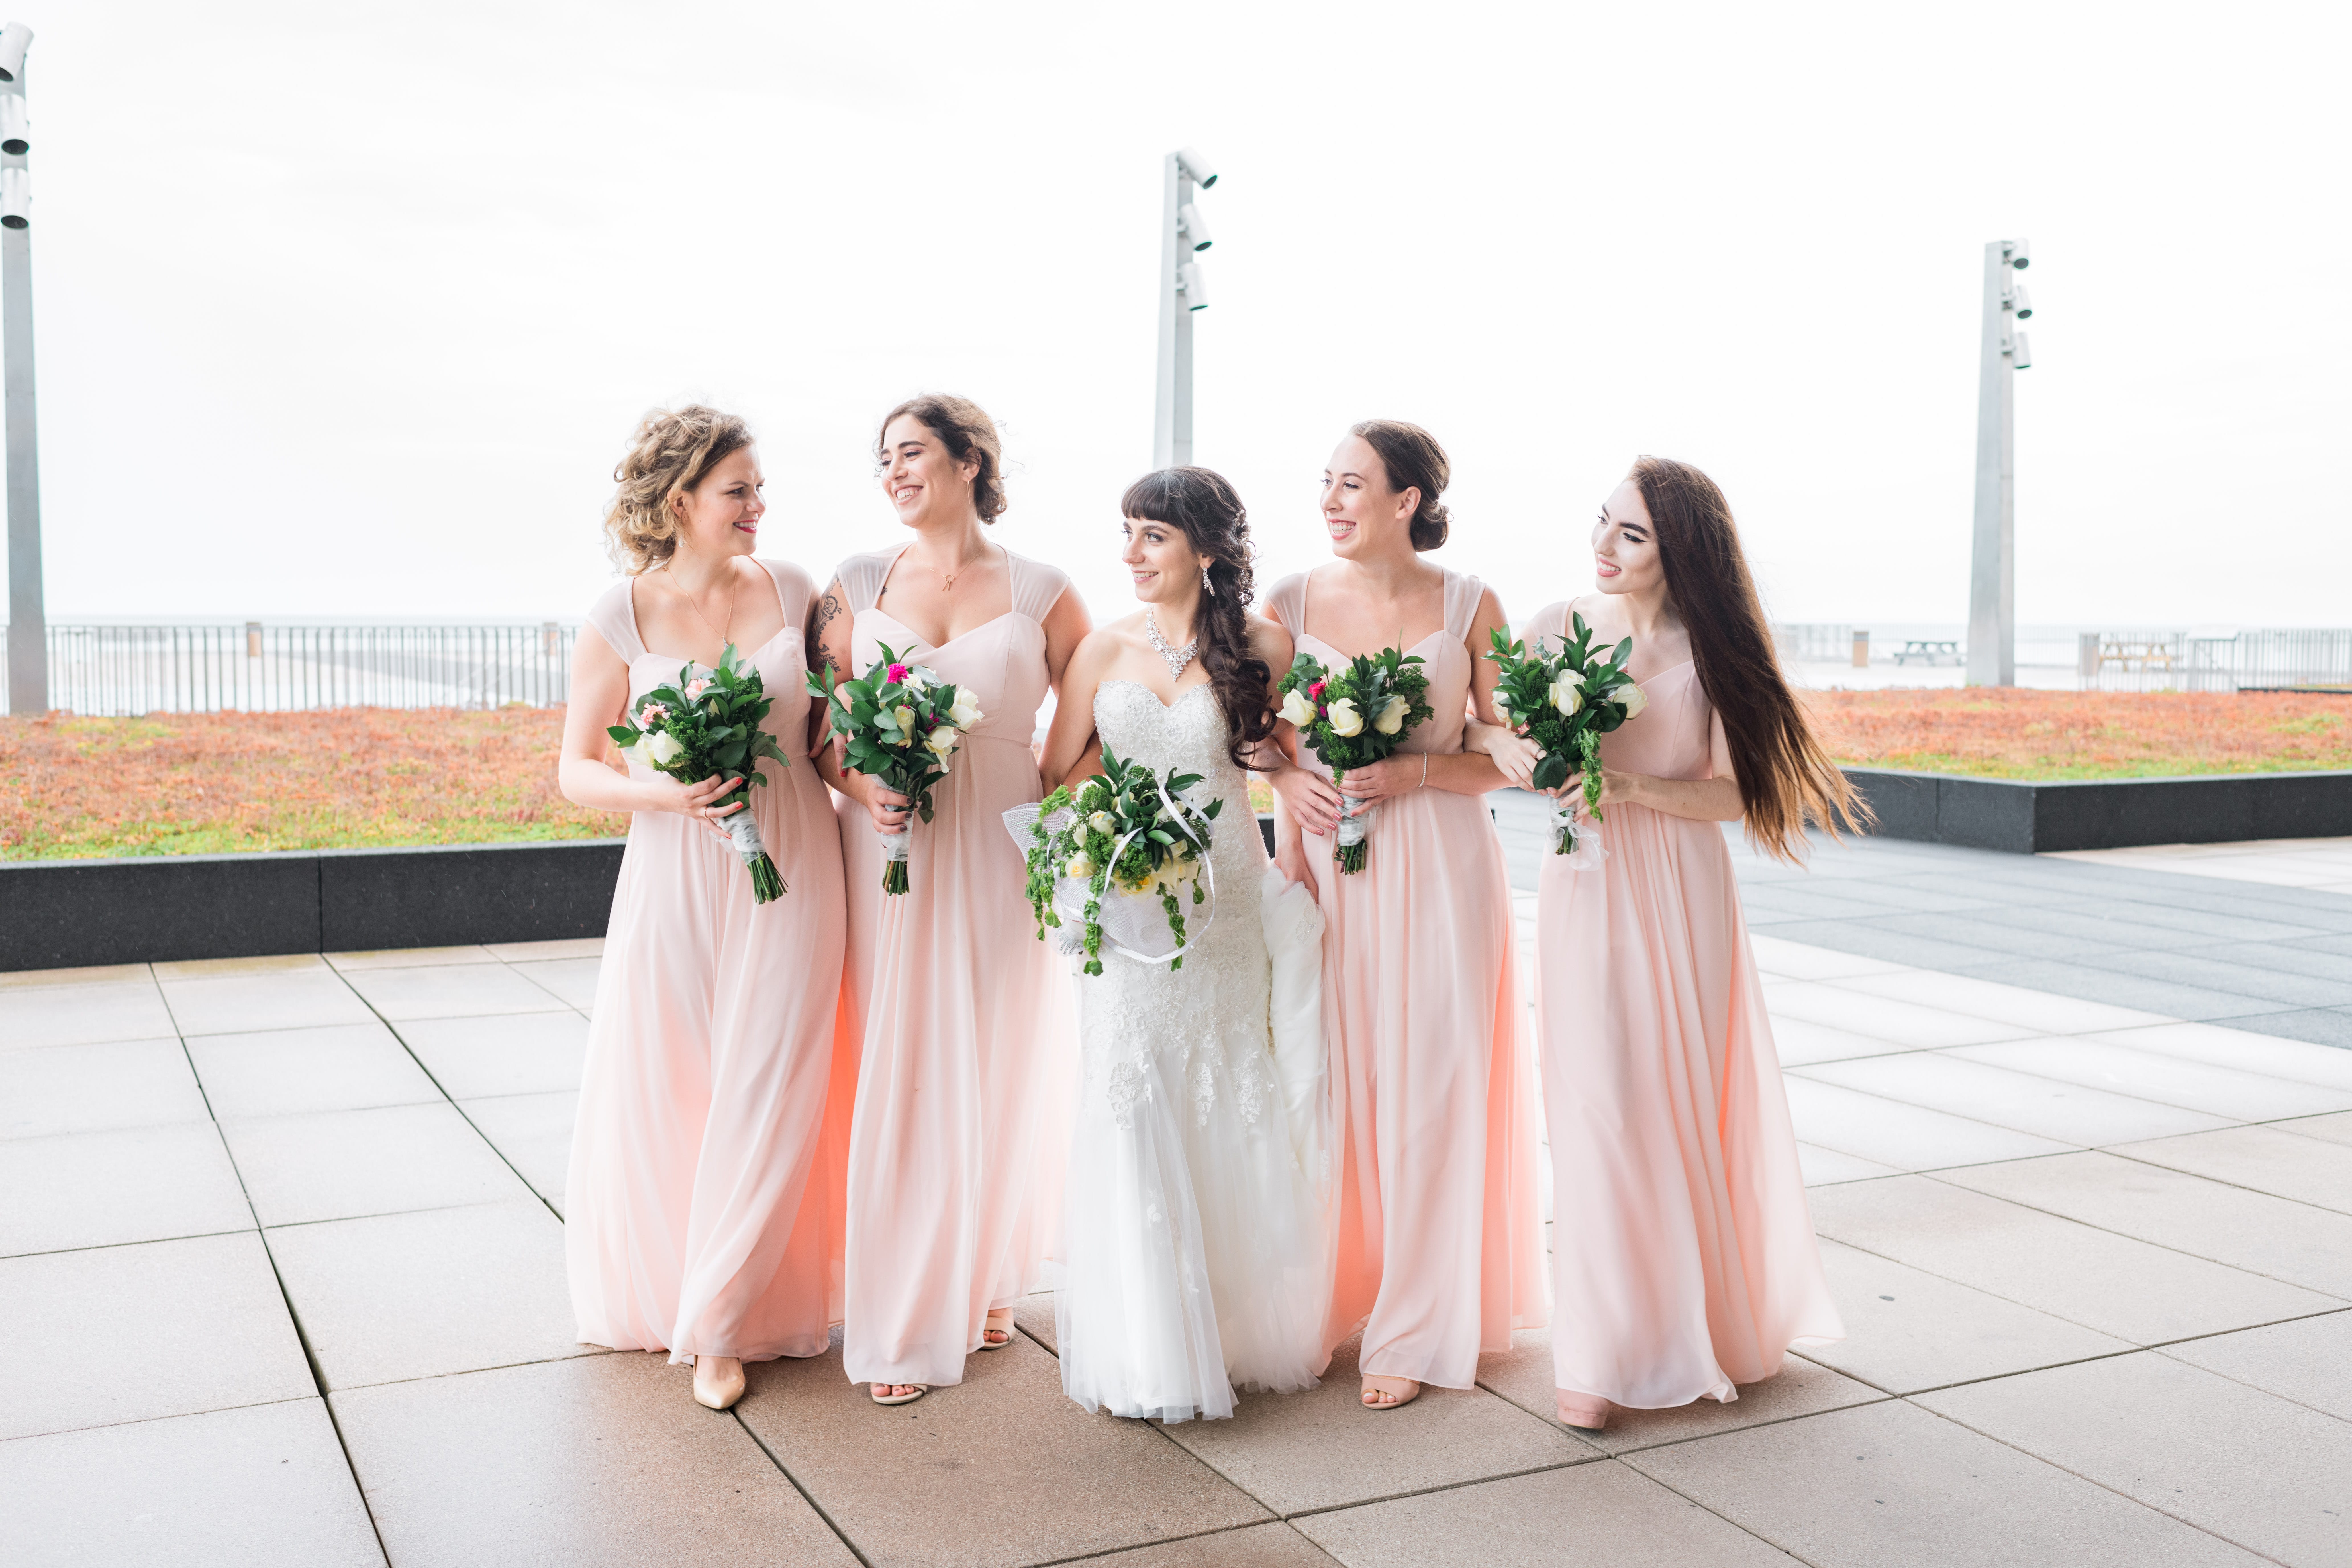 Bride and bridesmaids walking while talking to each other towards the camera